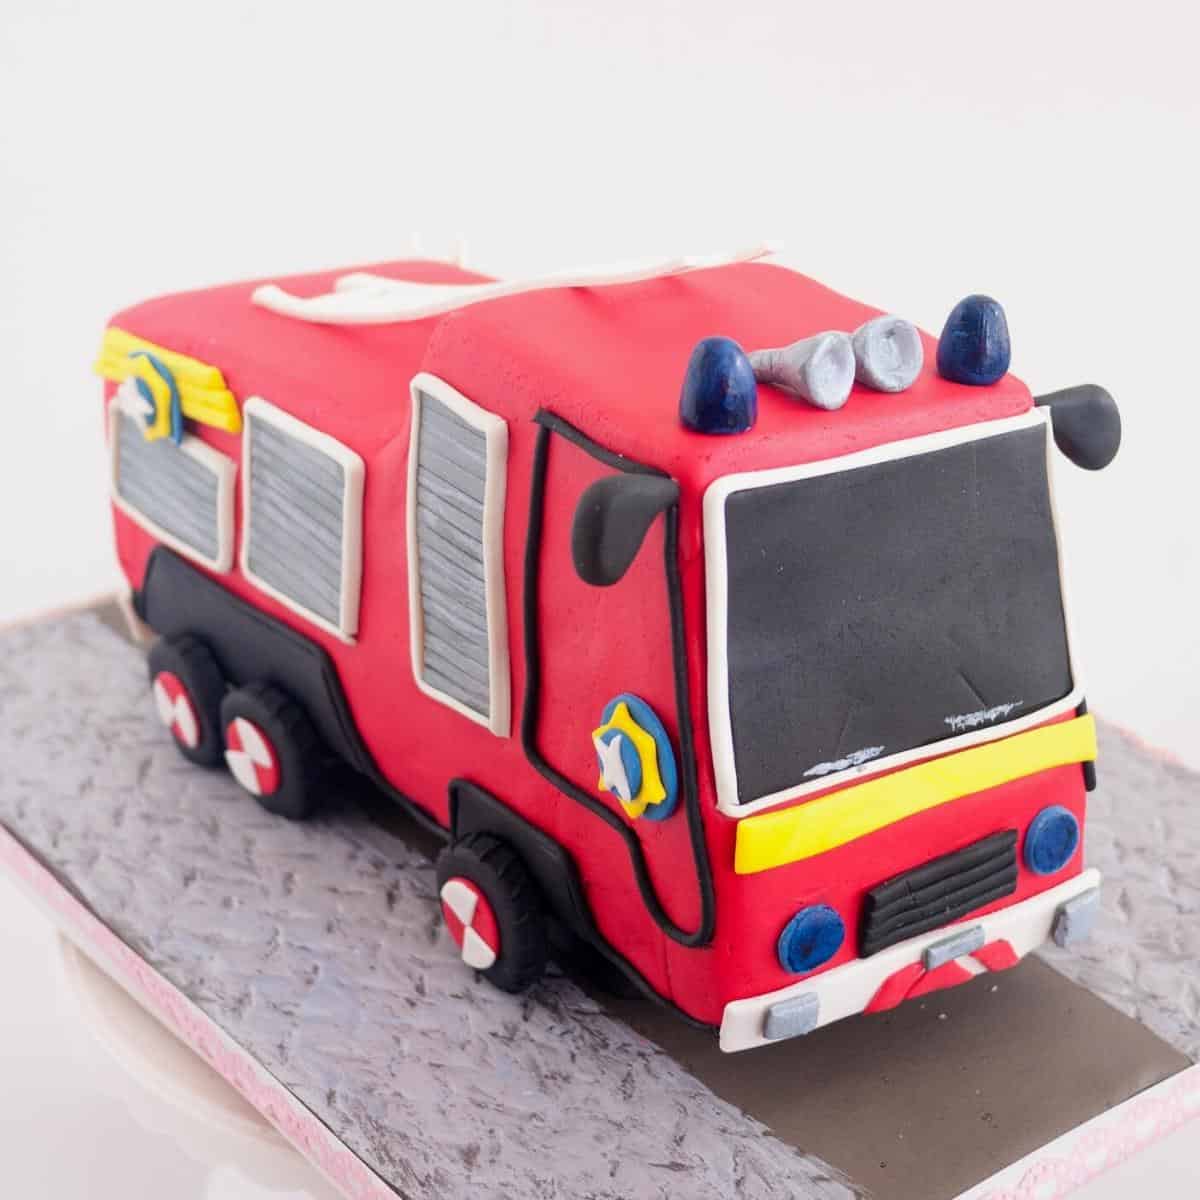 A frosted cake carve fire truck cake. on a cake board.